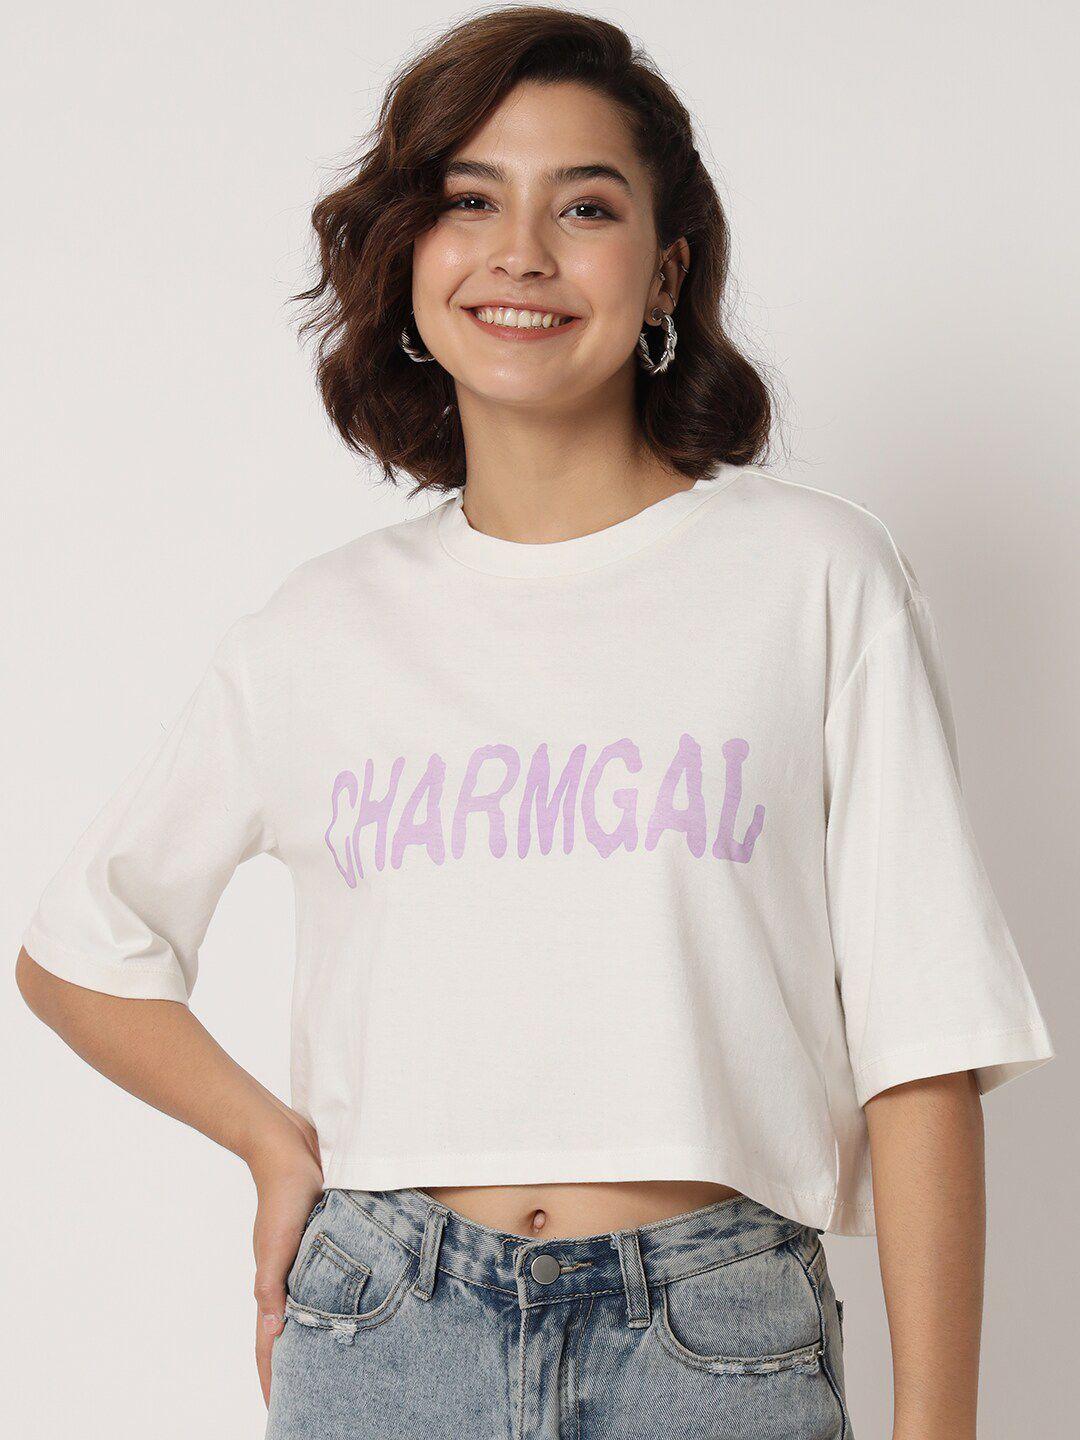 charmgal typography printed boxy fit crop t-shirt